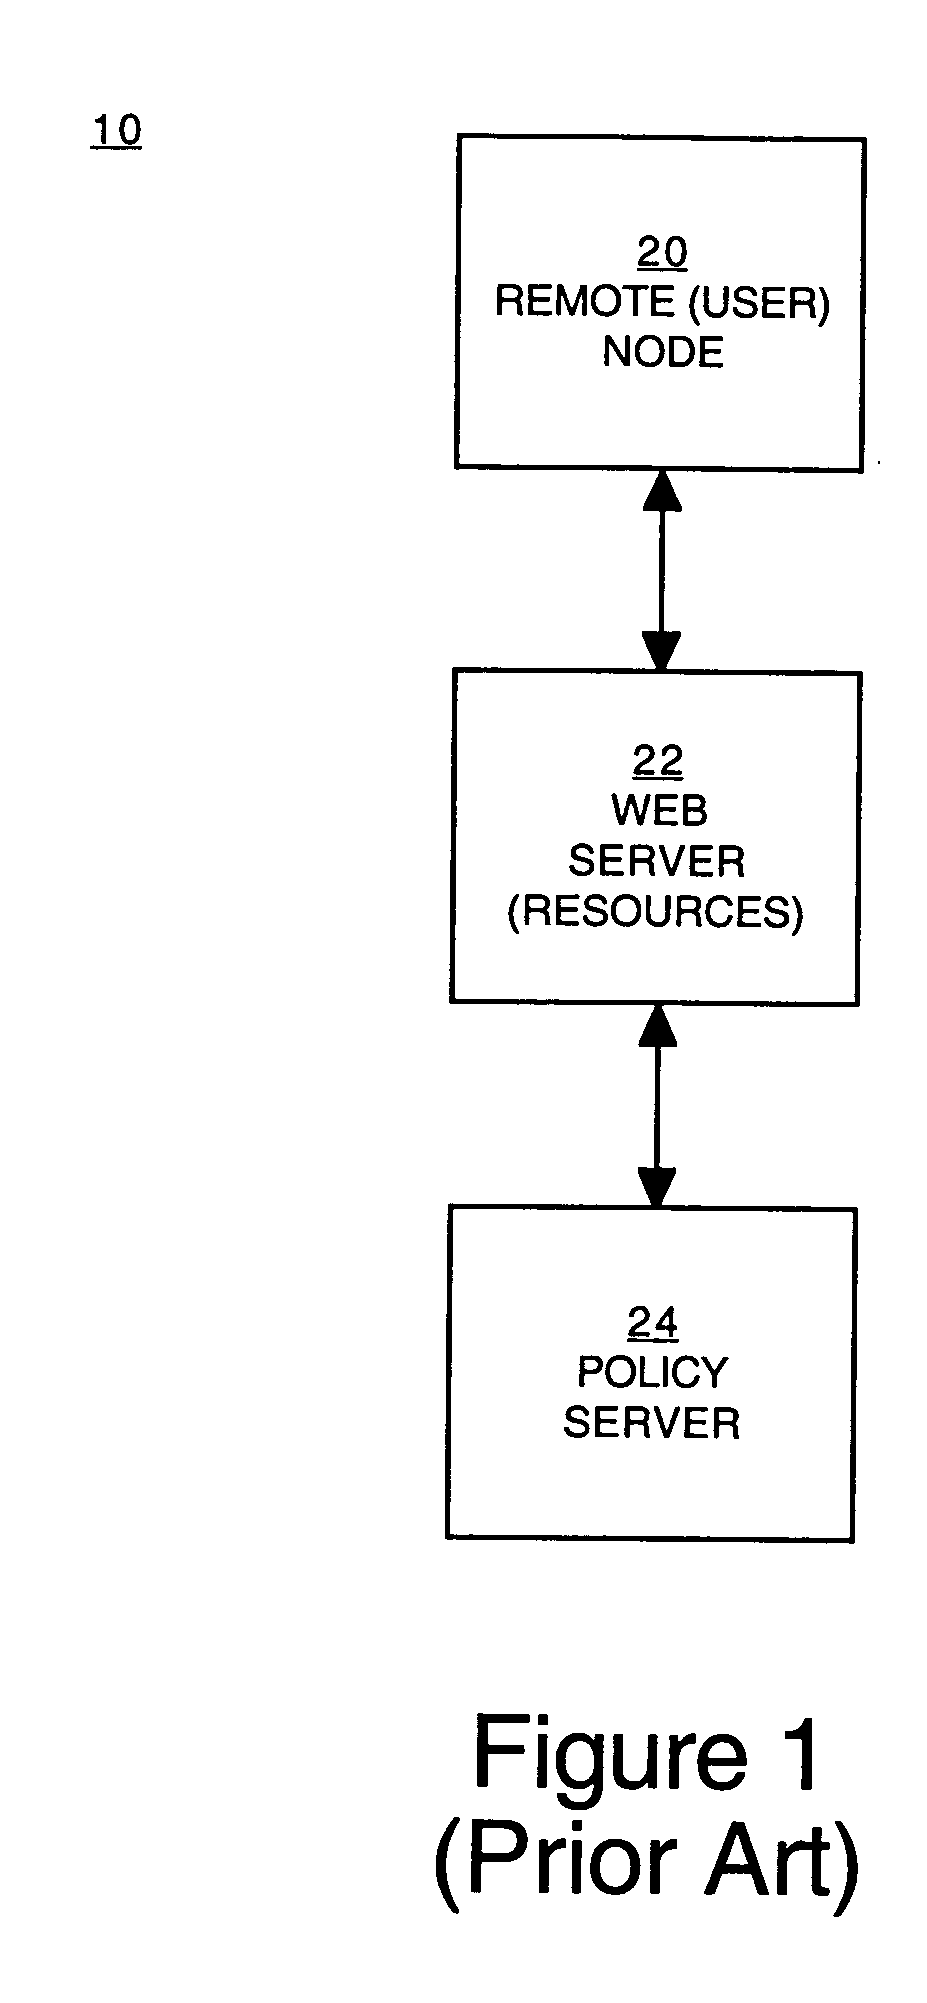 Remote interface for policy decisions governing access control